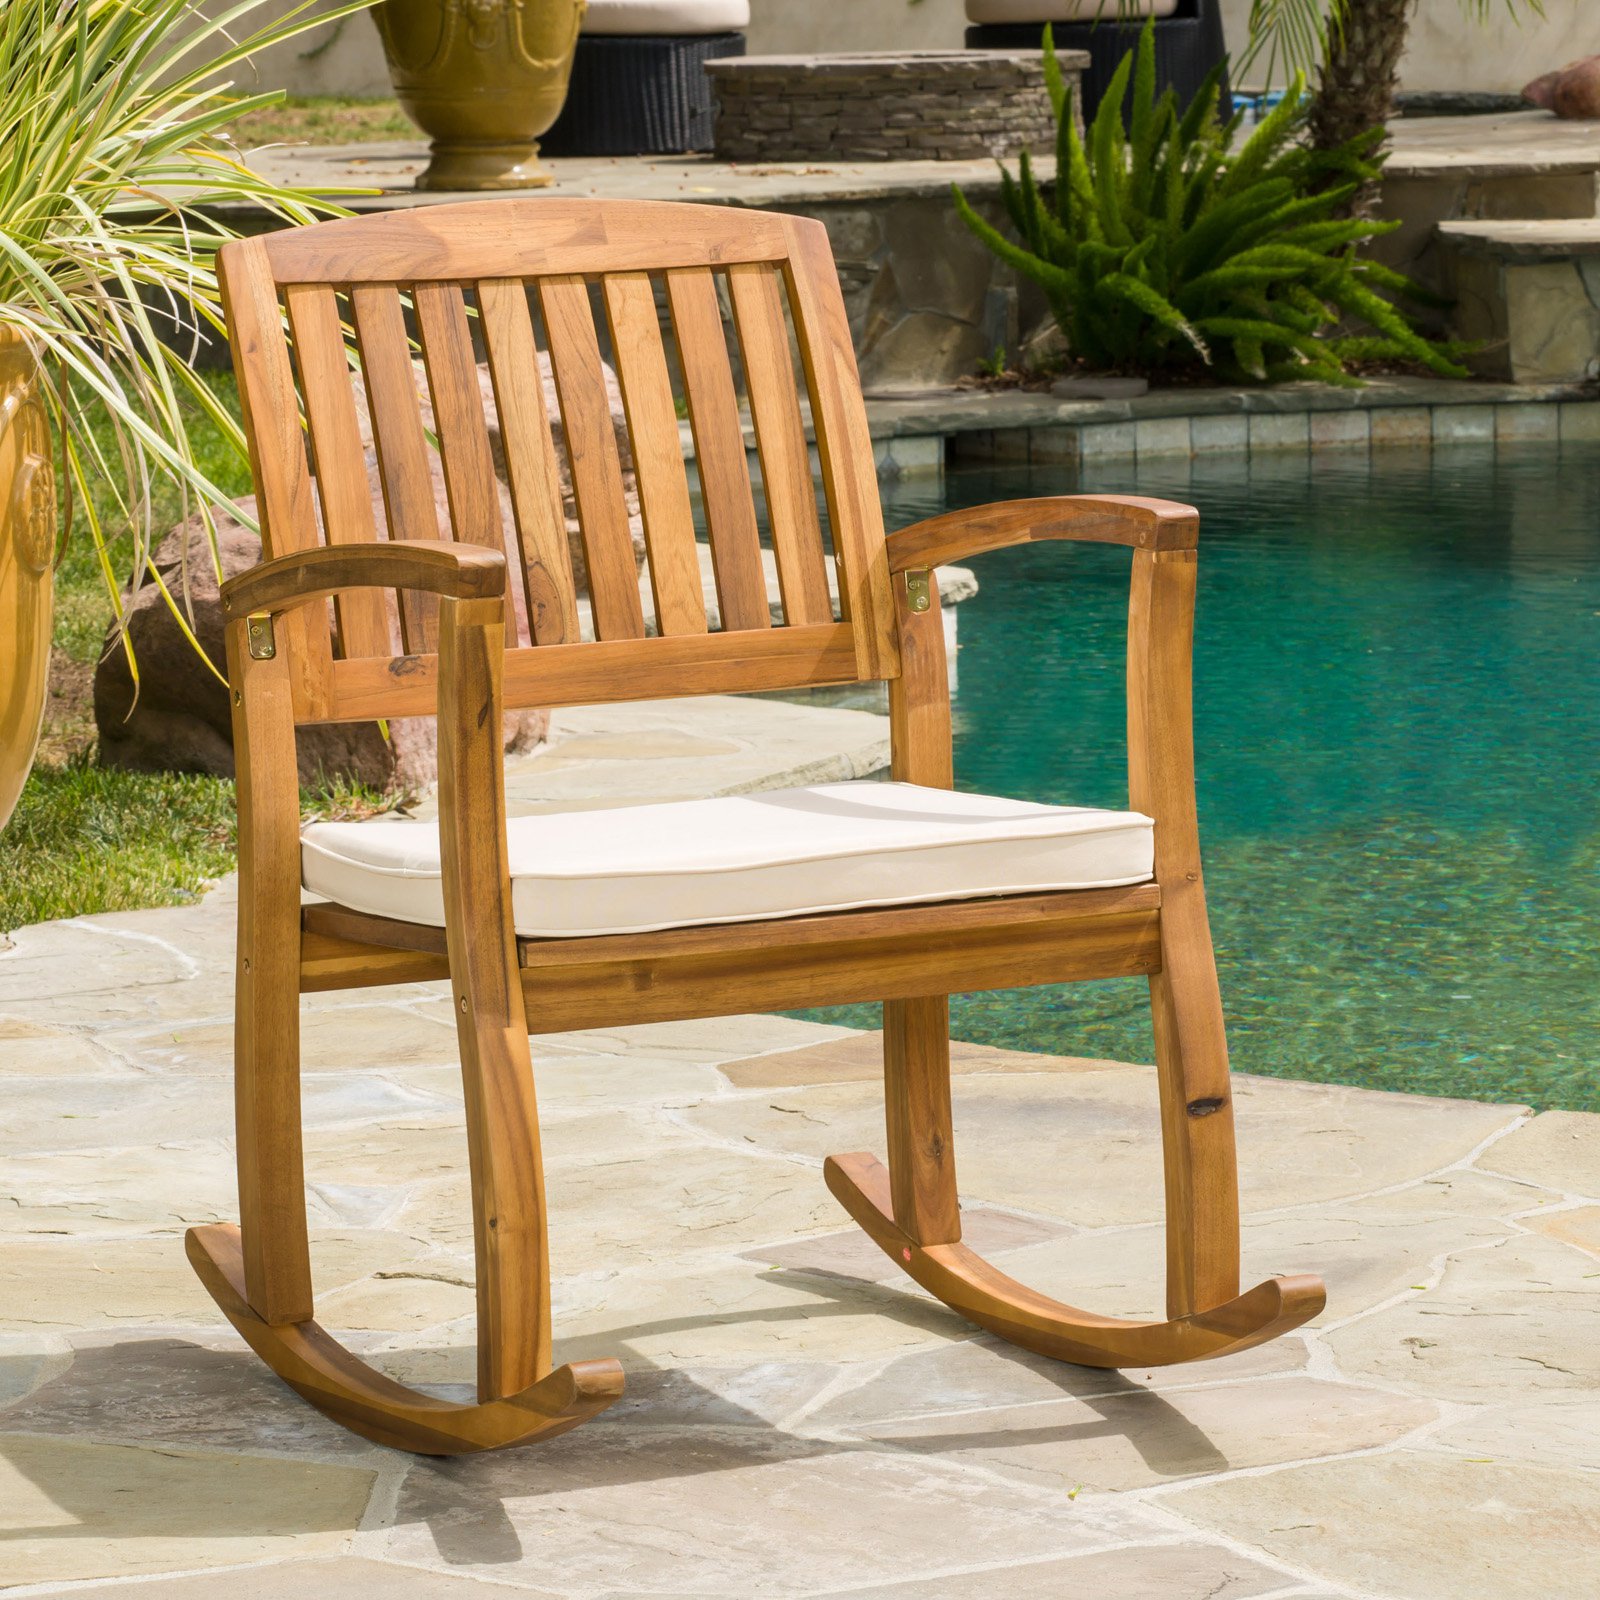 Naomi Outdoor Rocking Chair with Cushion - image 1 of 5